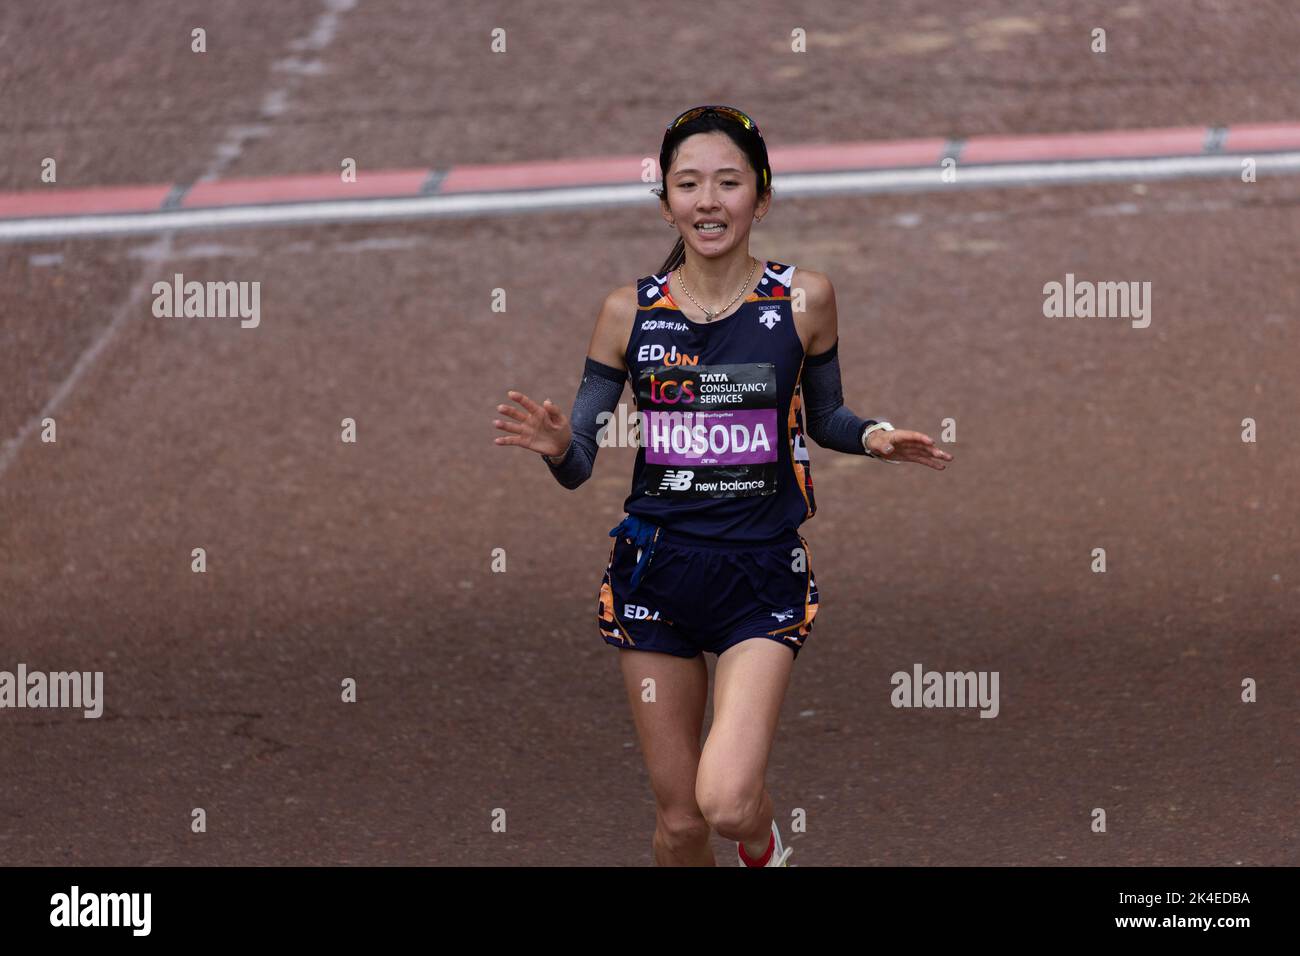 LONDON, ENGLAND - 02 OCTOBER 2022: Ai Hosoda of Japan celebrates as she finishes the Women's Elite race during the 2022 TCS London Marathon at the Mall on 2nd October, 2022 in London, England. Credit: SMP News / Alamy Live News Stock Photo